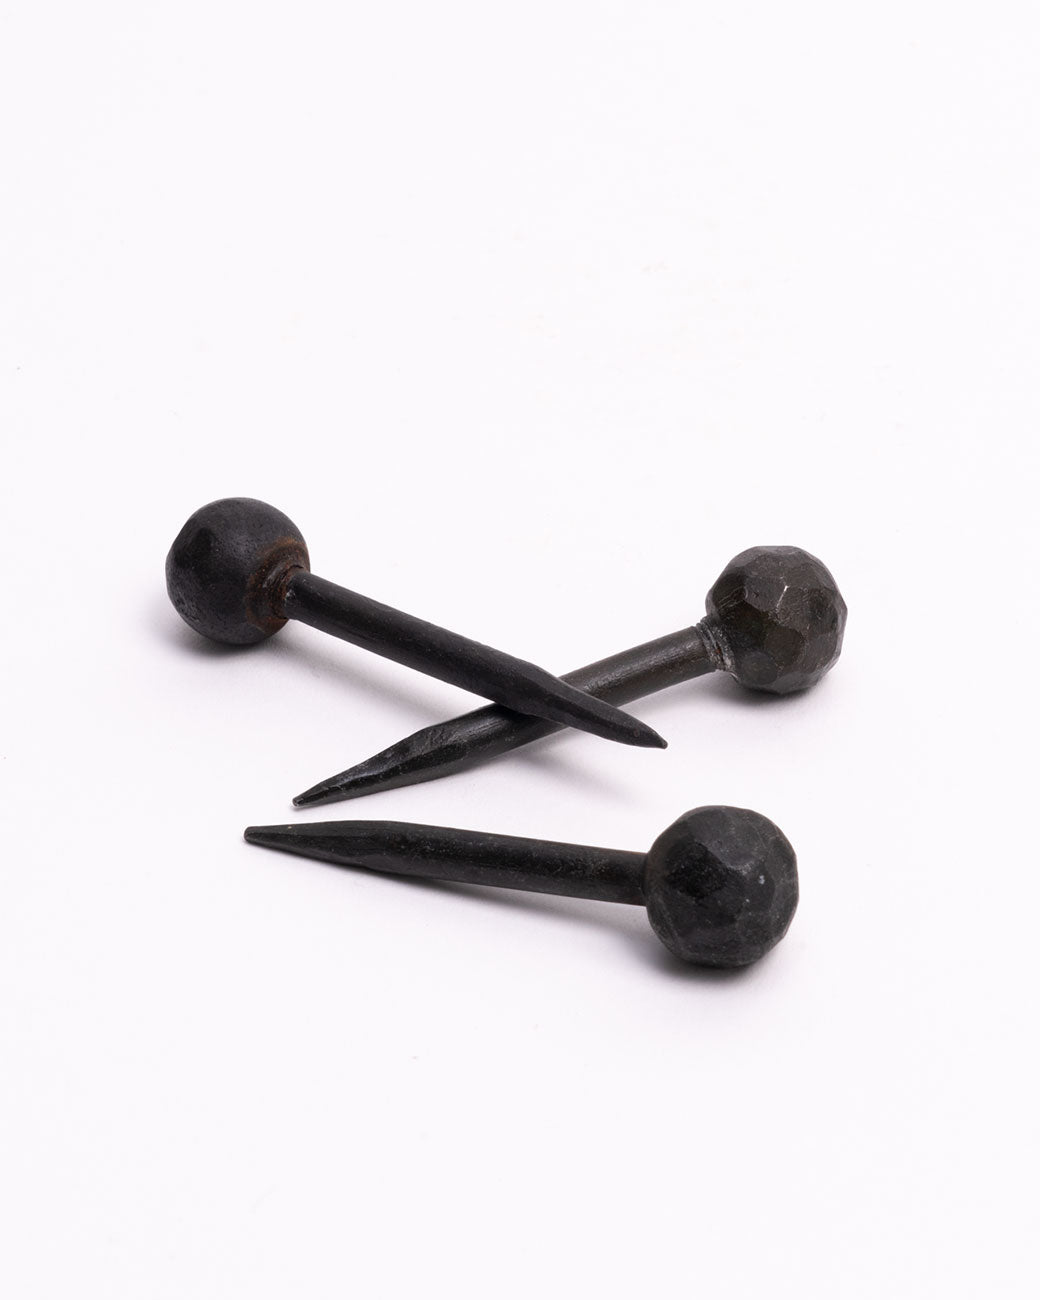 A group of three round head iron nails.